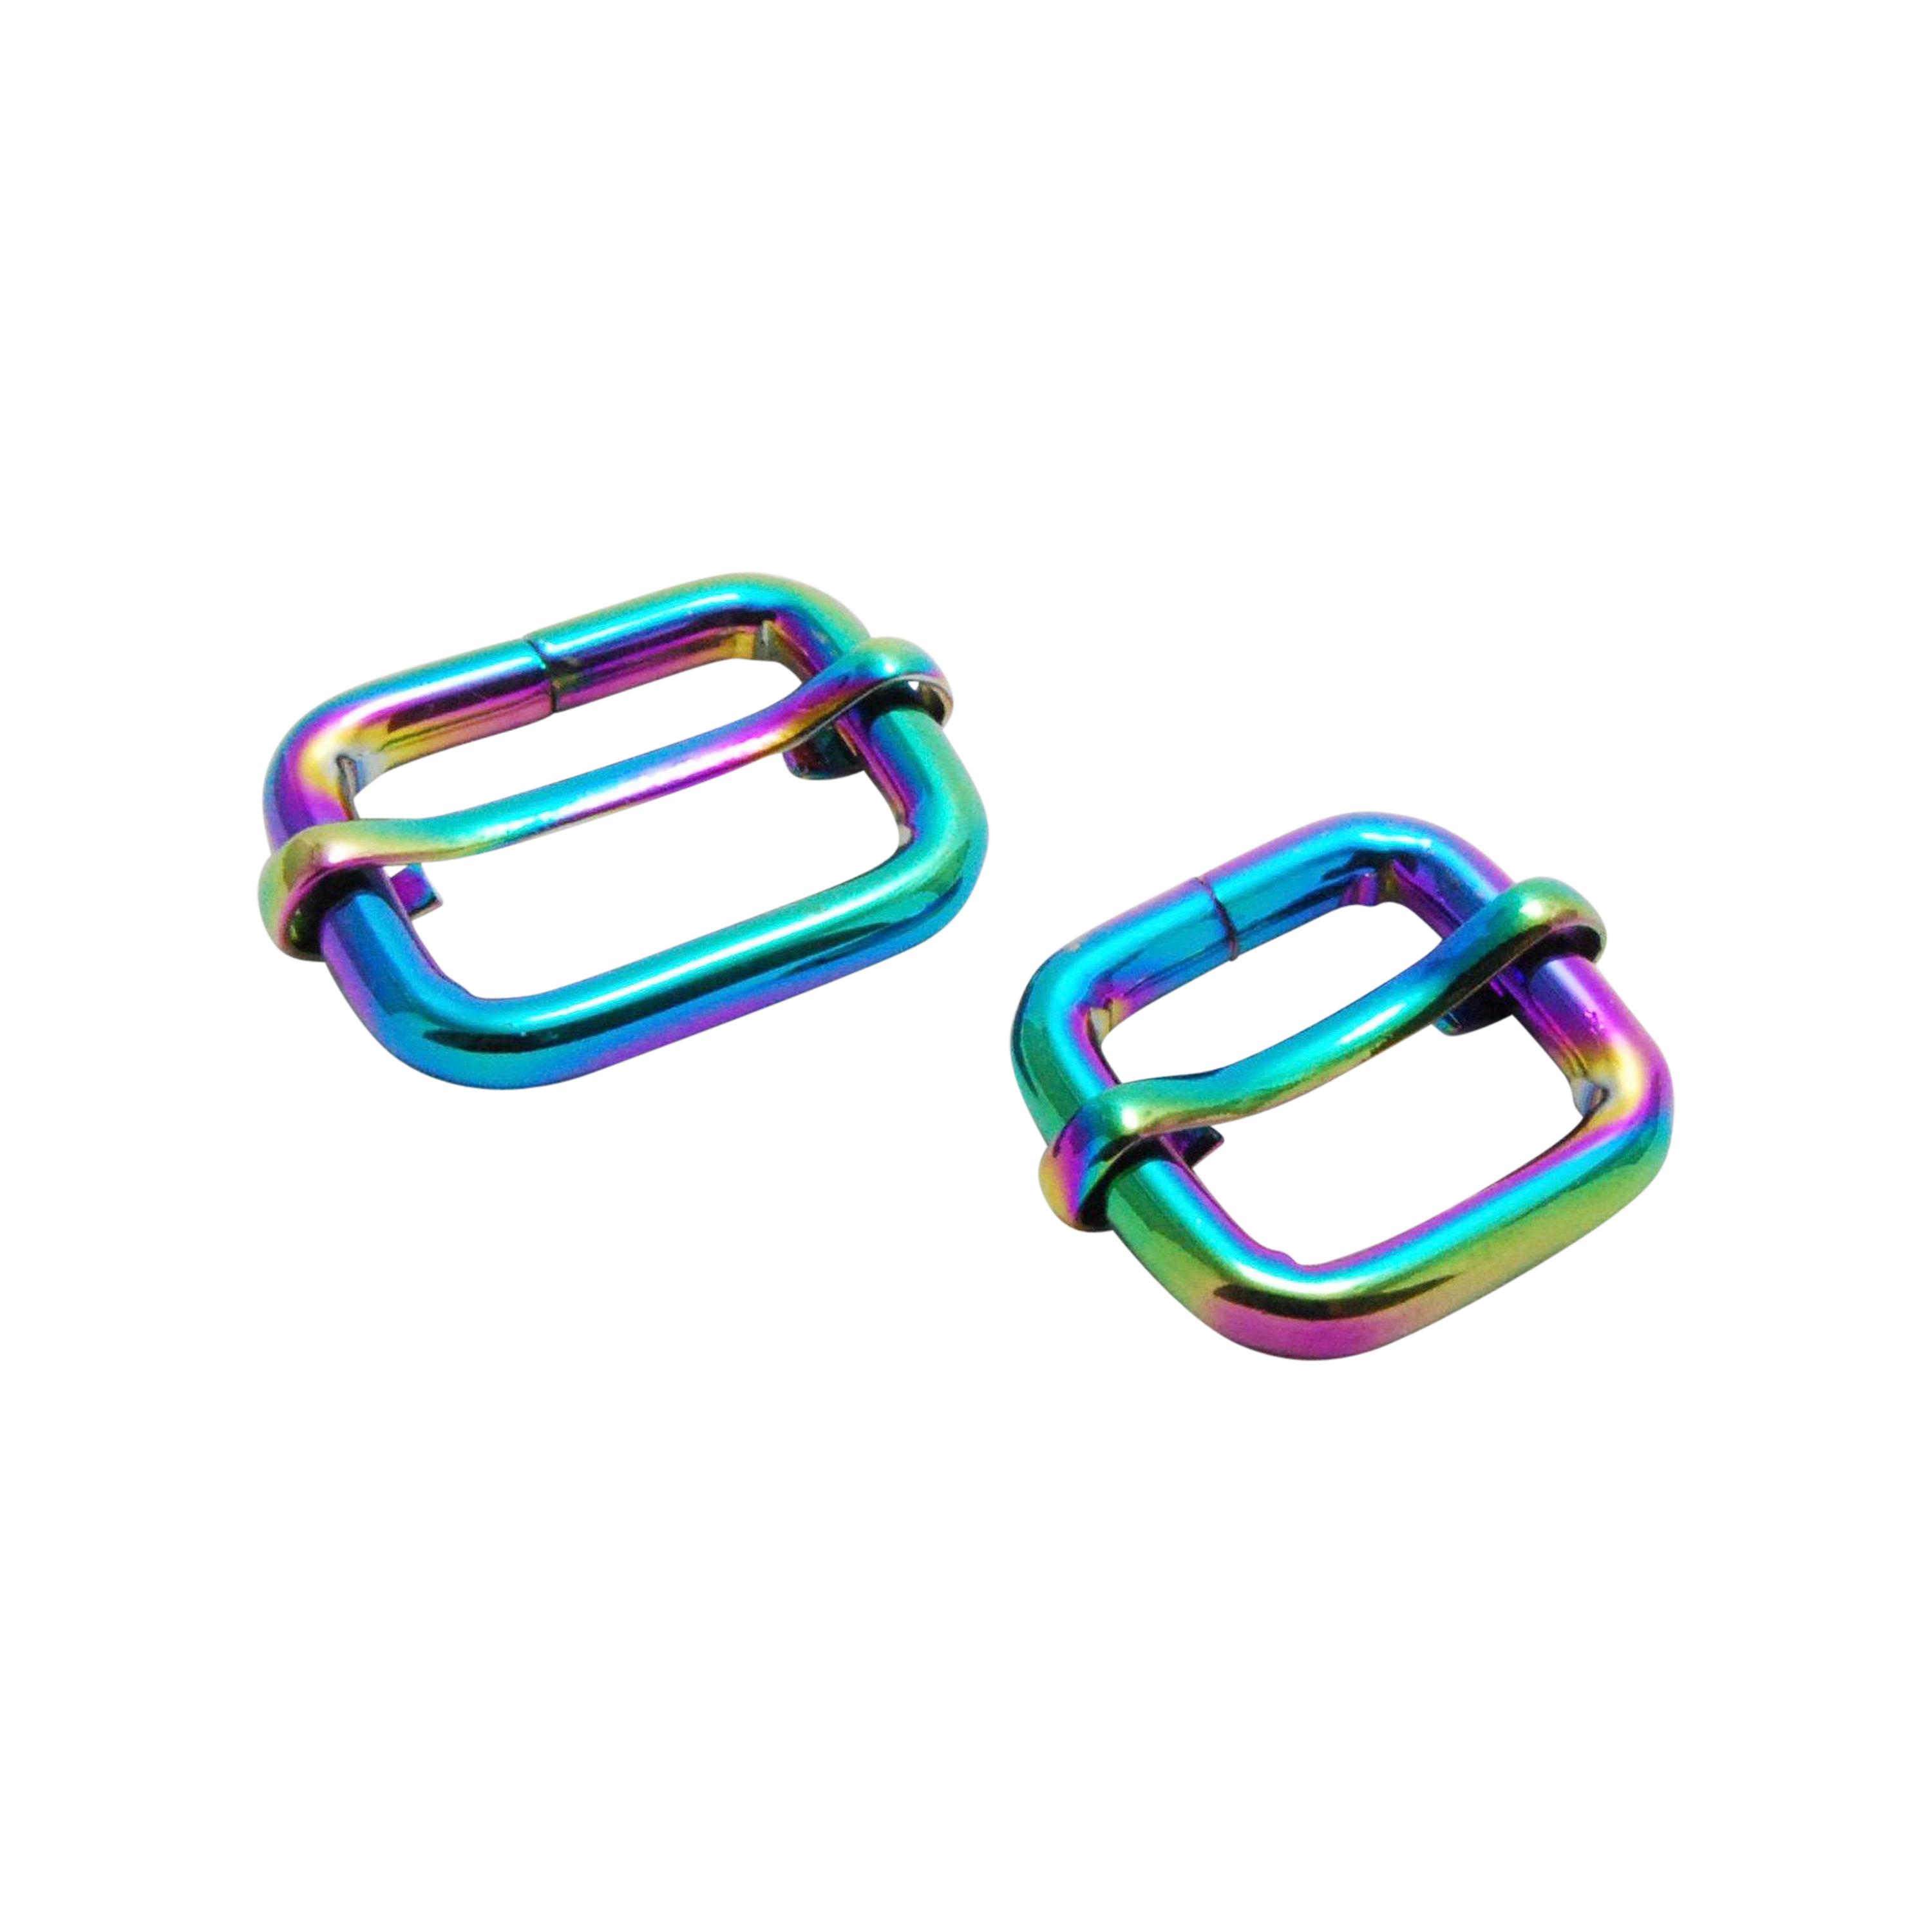 make an adjustable bag strap with this gorgeous iridescent rainbow slider buckles available in two widths, 3/4" (20mm) and 1" (25mm)